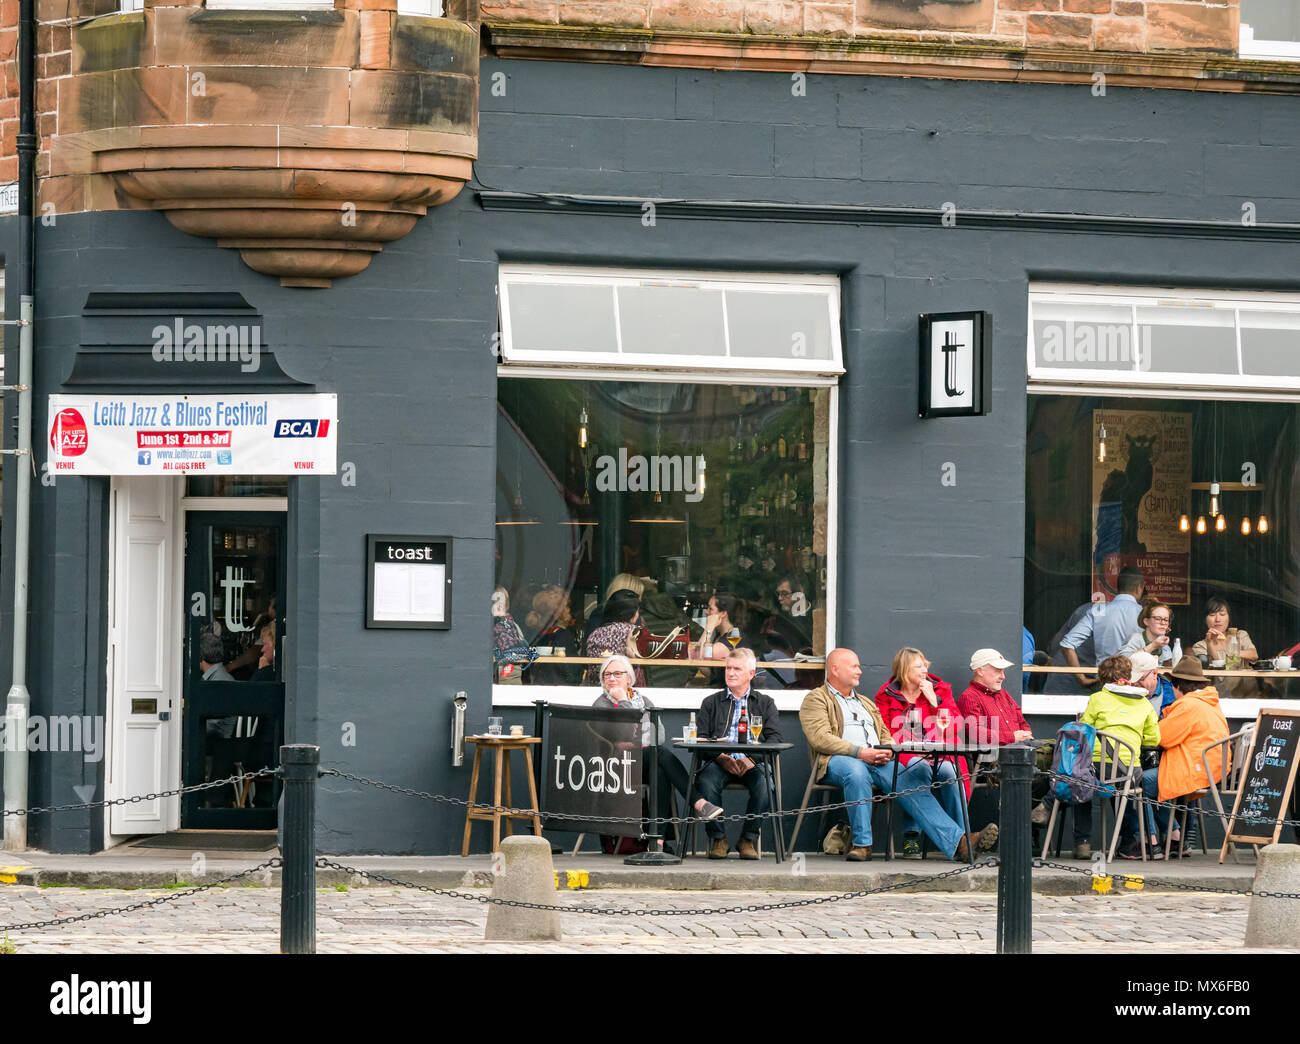 Leith Jazz & Blues Festival live music in restaurants and bars by the Water of  Leith, 3rd June 2018. The Shore, Leith, Edinburgh, Scotland, United Kingdom. The jazz and blues festival takes place over 3 weekend days. People throng the outdoor pavement tables of the restaurants and bars along the Water of Leith enjoying listening to the free live music. People at the wine bar and restaurant called Toast with the festival banner displayed Stock Photo